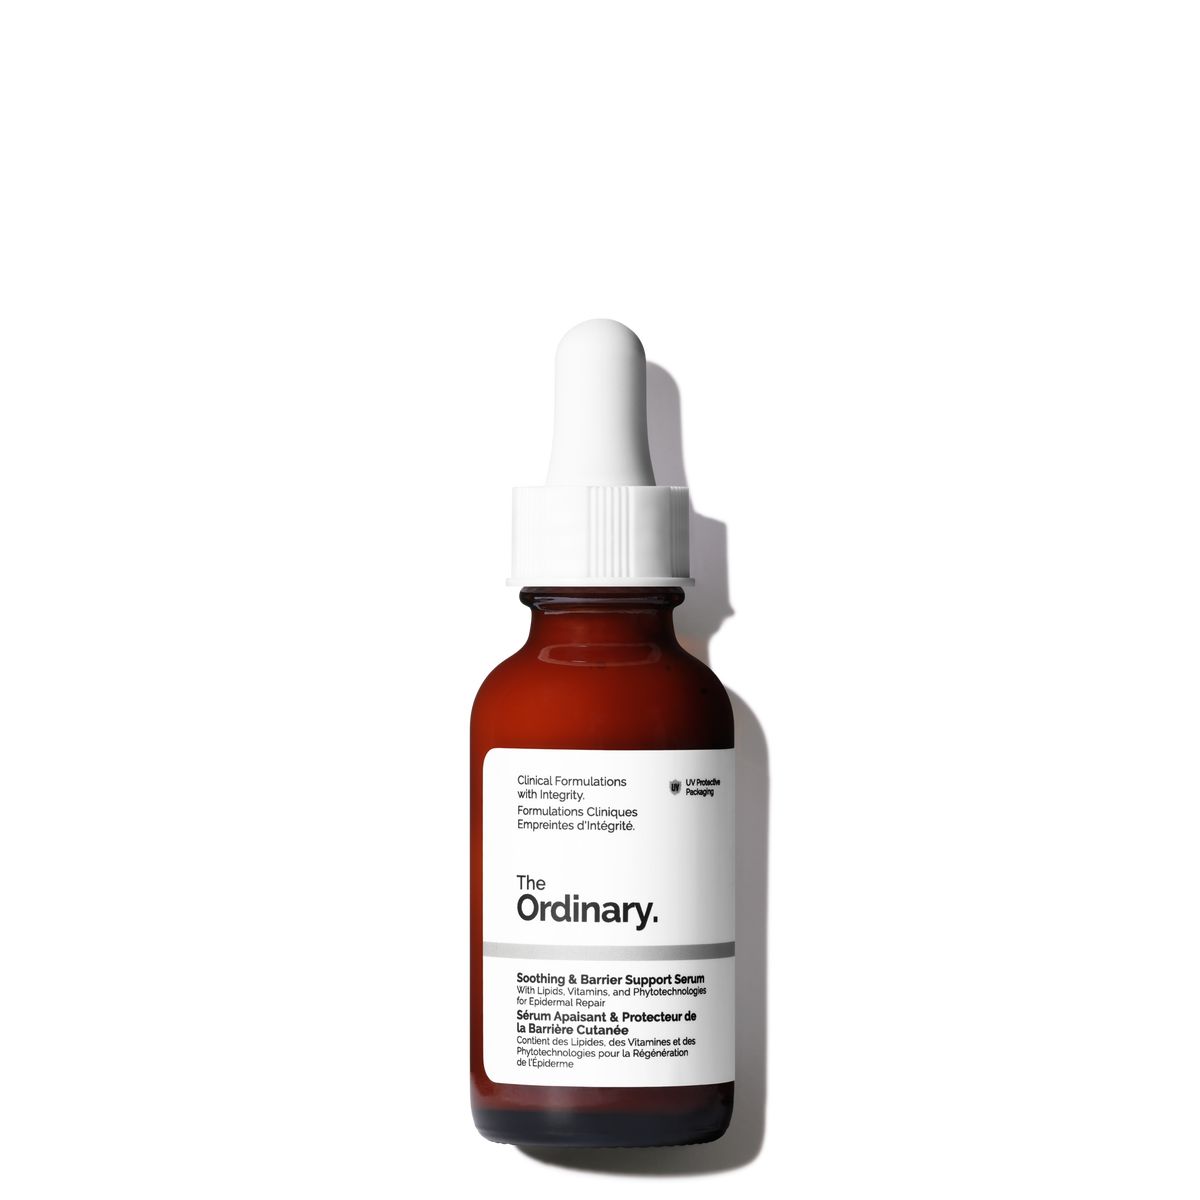 The OrdinarySoothing & Barrier Support Serum | The Ordinary